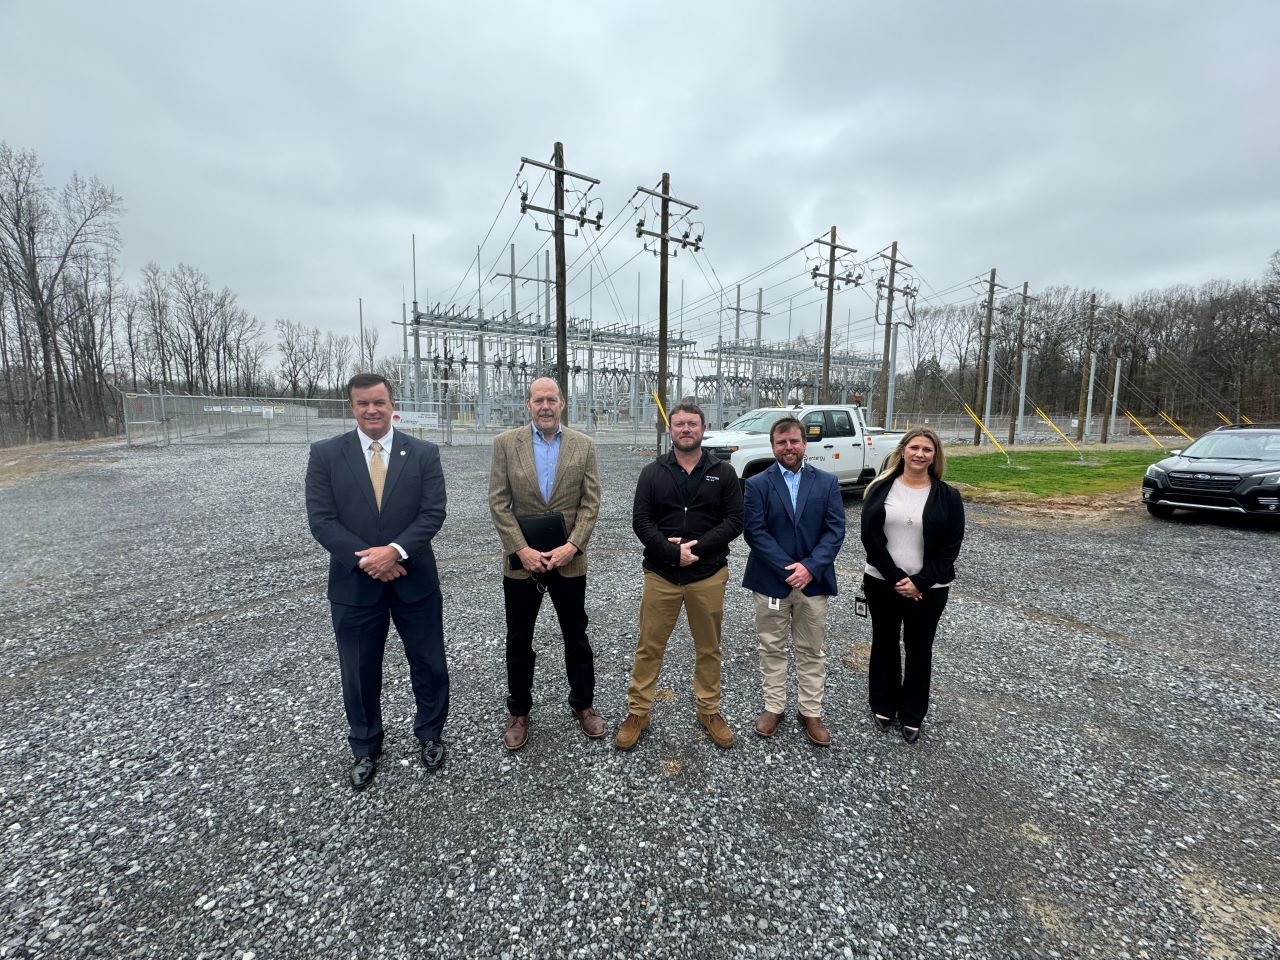 Southaven Mayor Darren Musselwhite visits Snowden Park Substation with Entergy Mississippi team.